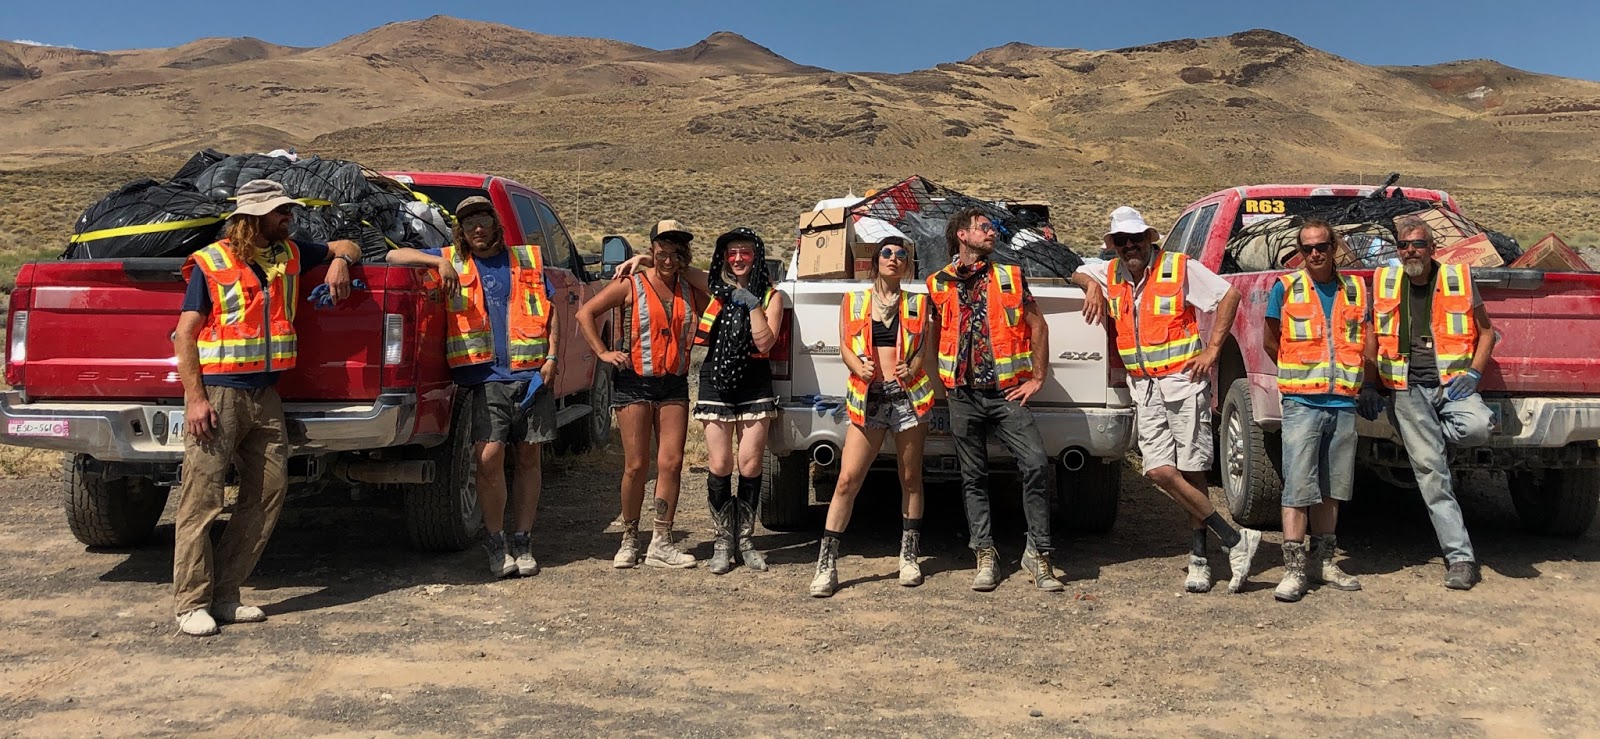 Burning Man Restoration Crew Completes Initial Highway Cleanup